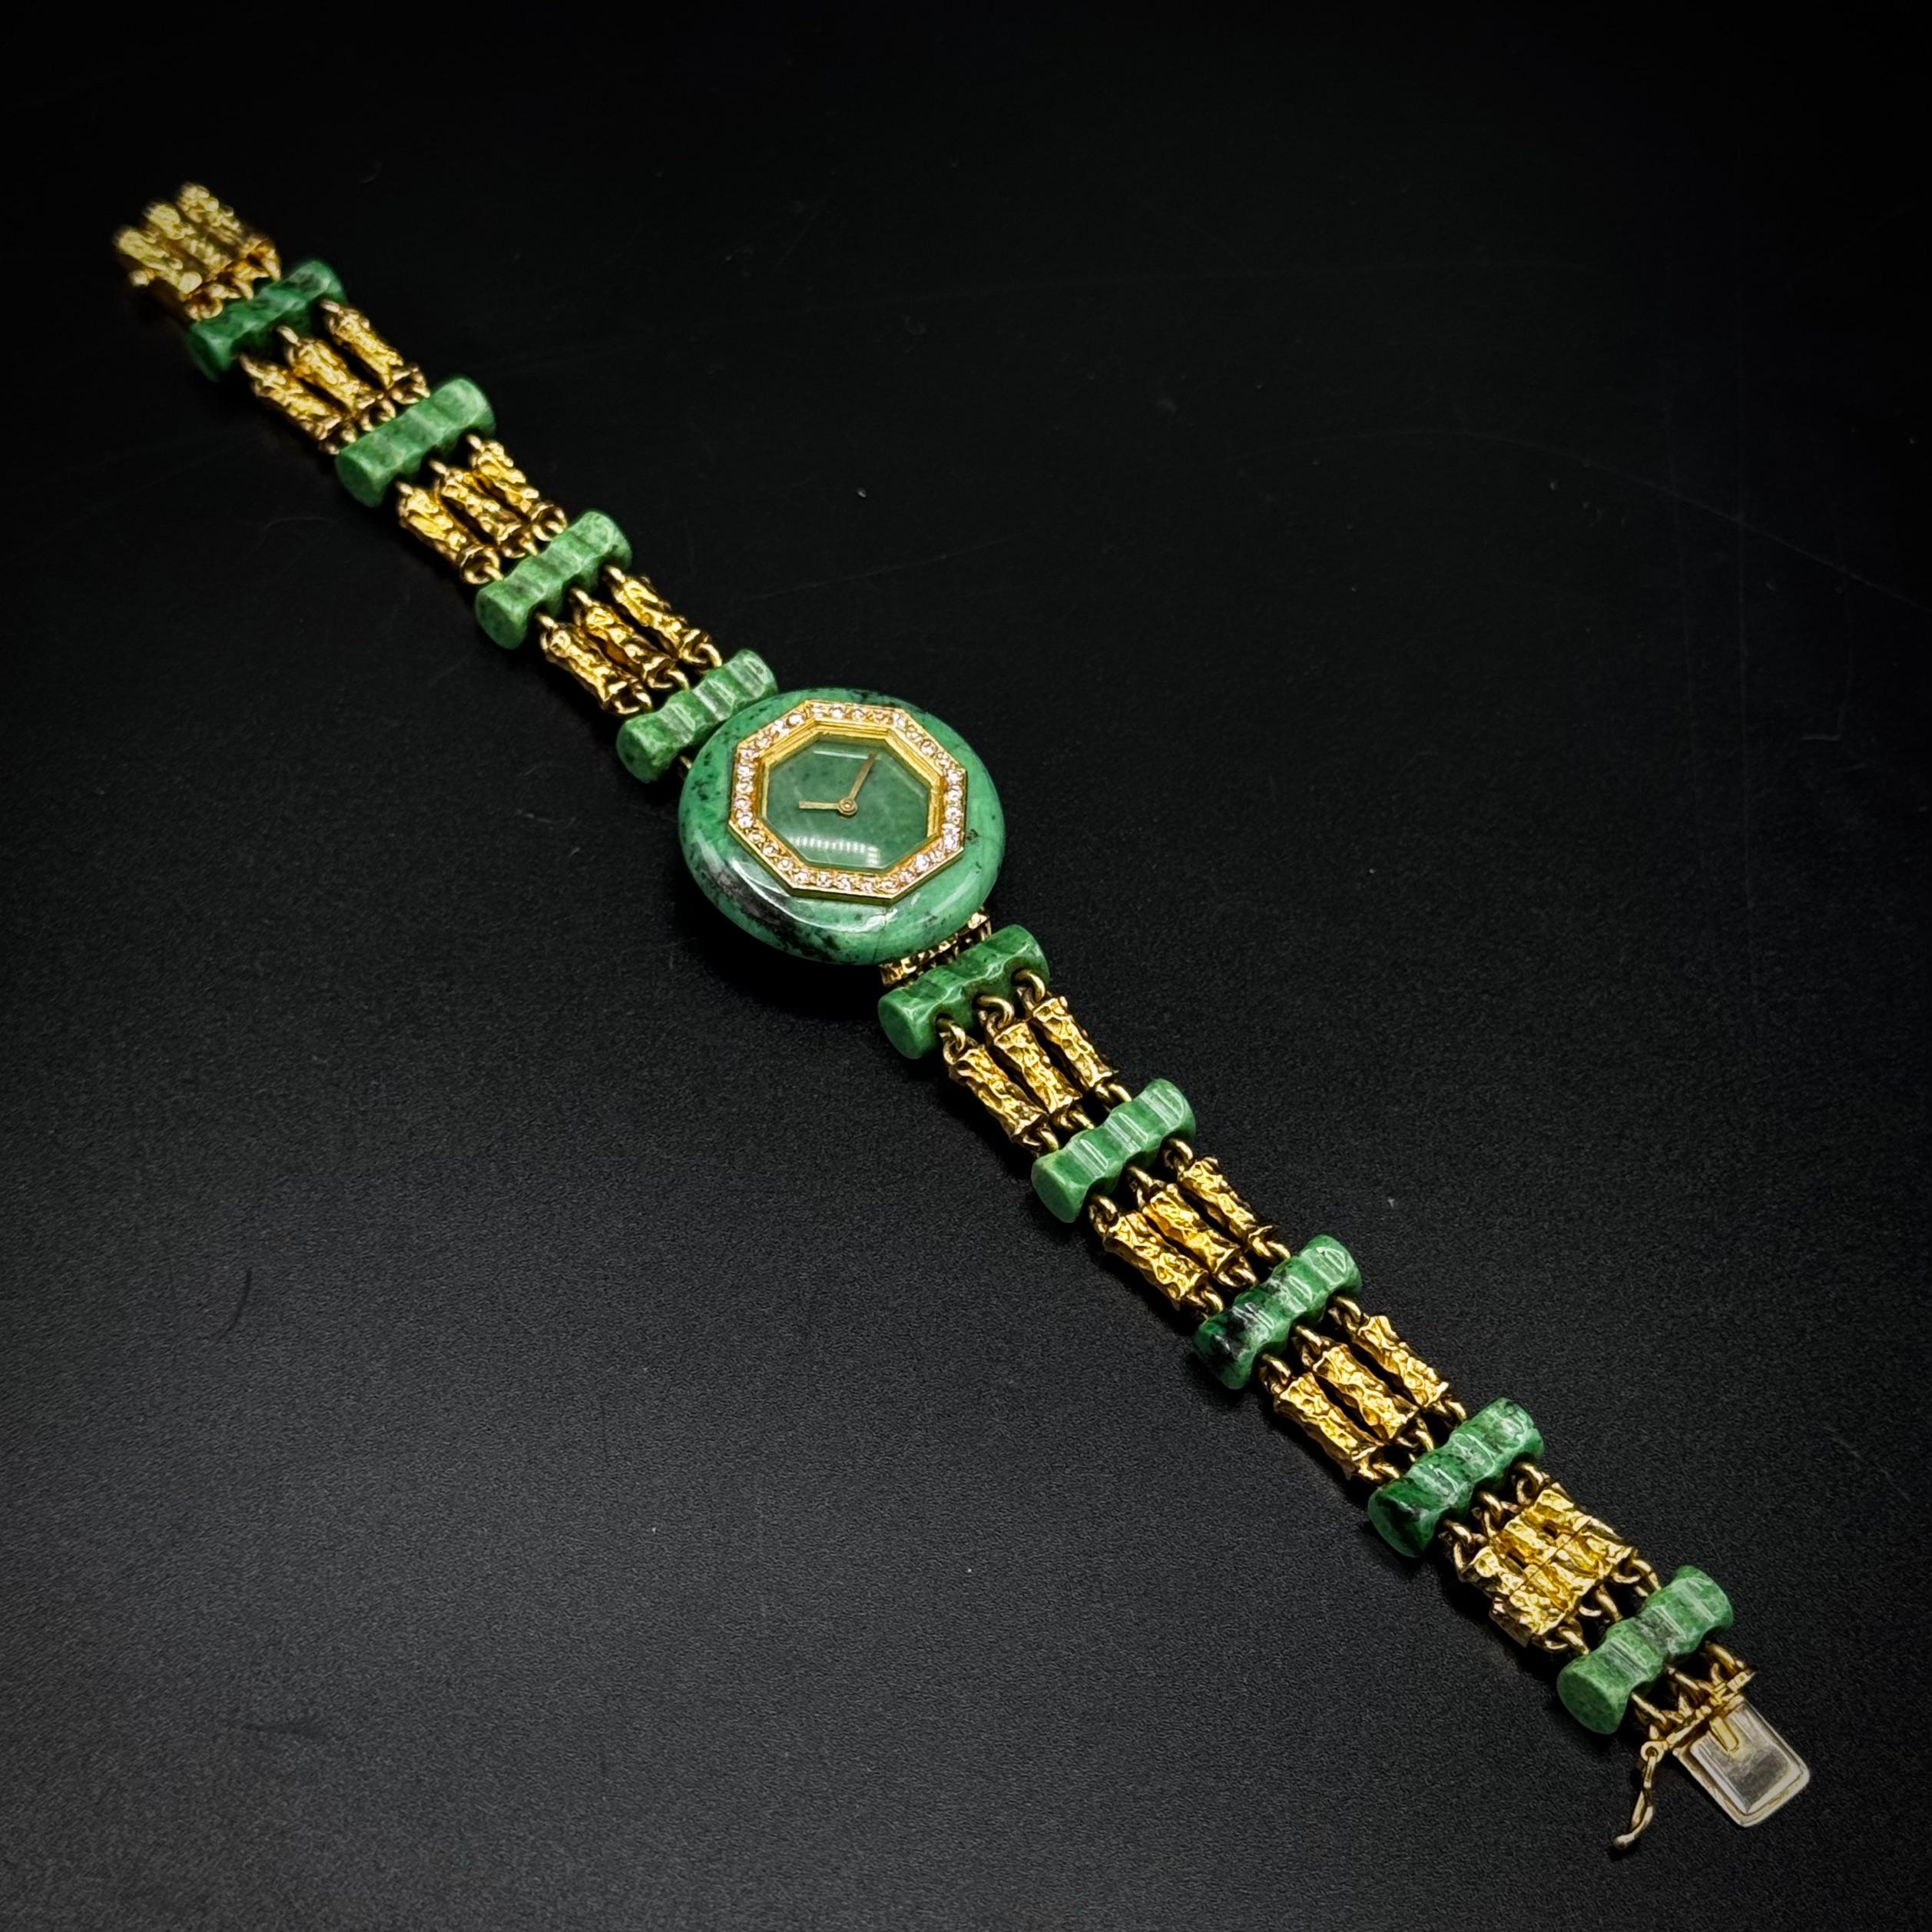 BOUCHERON ‘Bamboo’ anyolite and diamonds manual watch in 18kt yellow gold, France, 1970s. Embodying the pinnacle of 1970’s haute horlogerie, this Boucheron 'Bamboo' timepiece is a testament to the harmony between natural elements and opulent design.